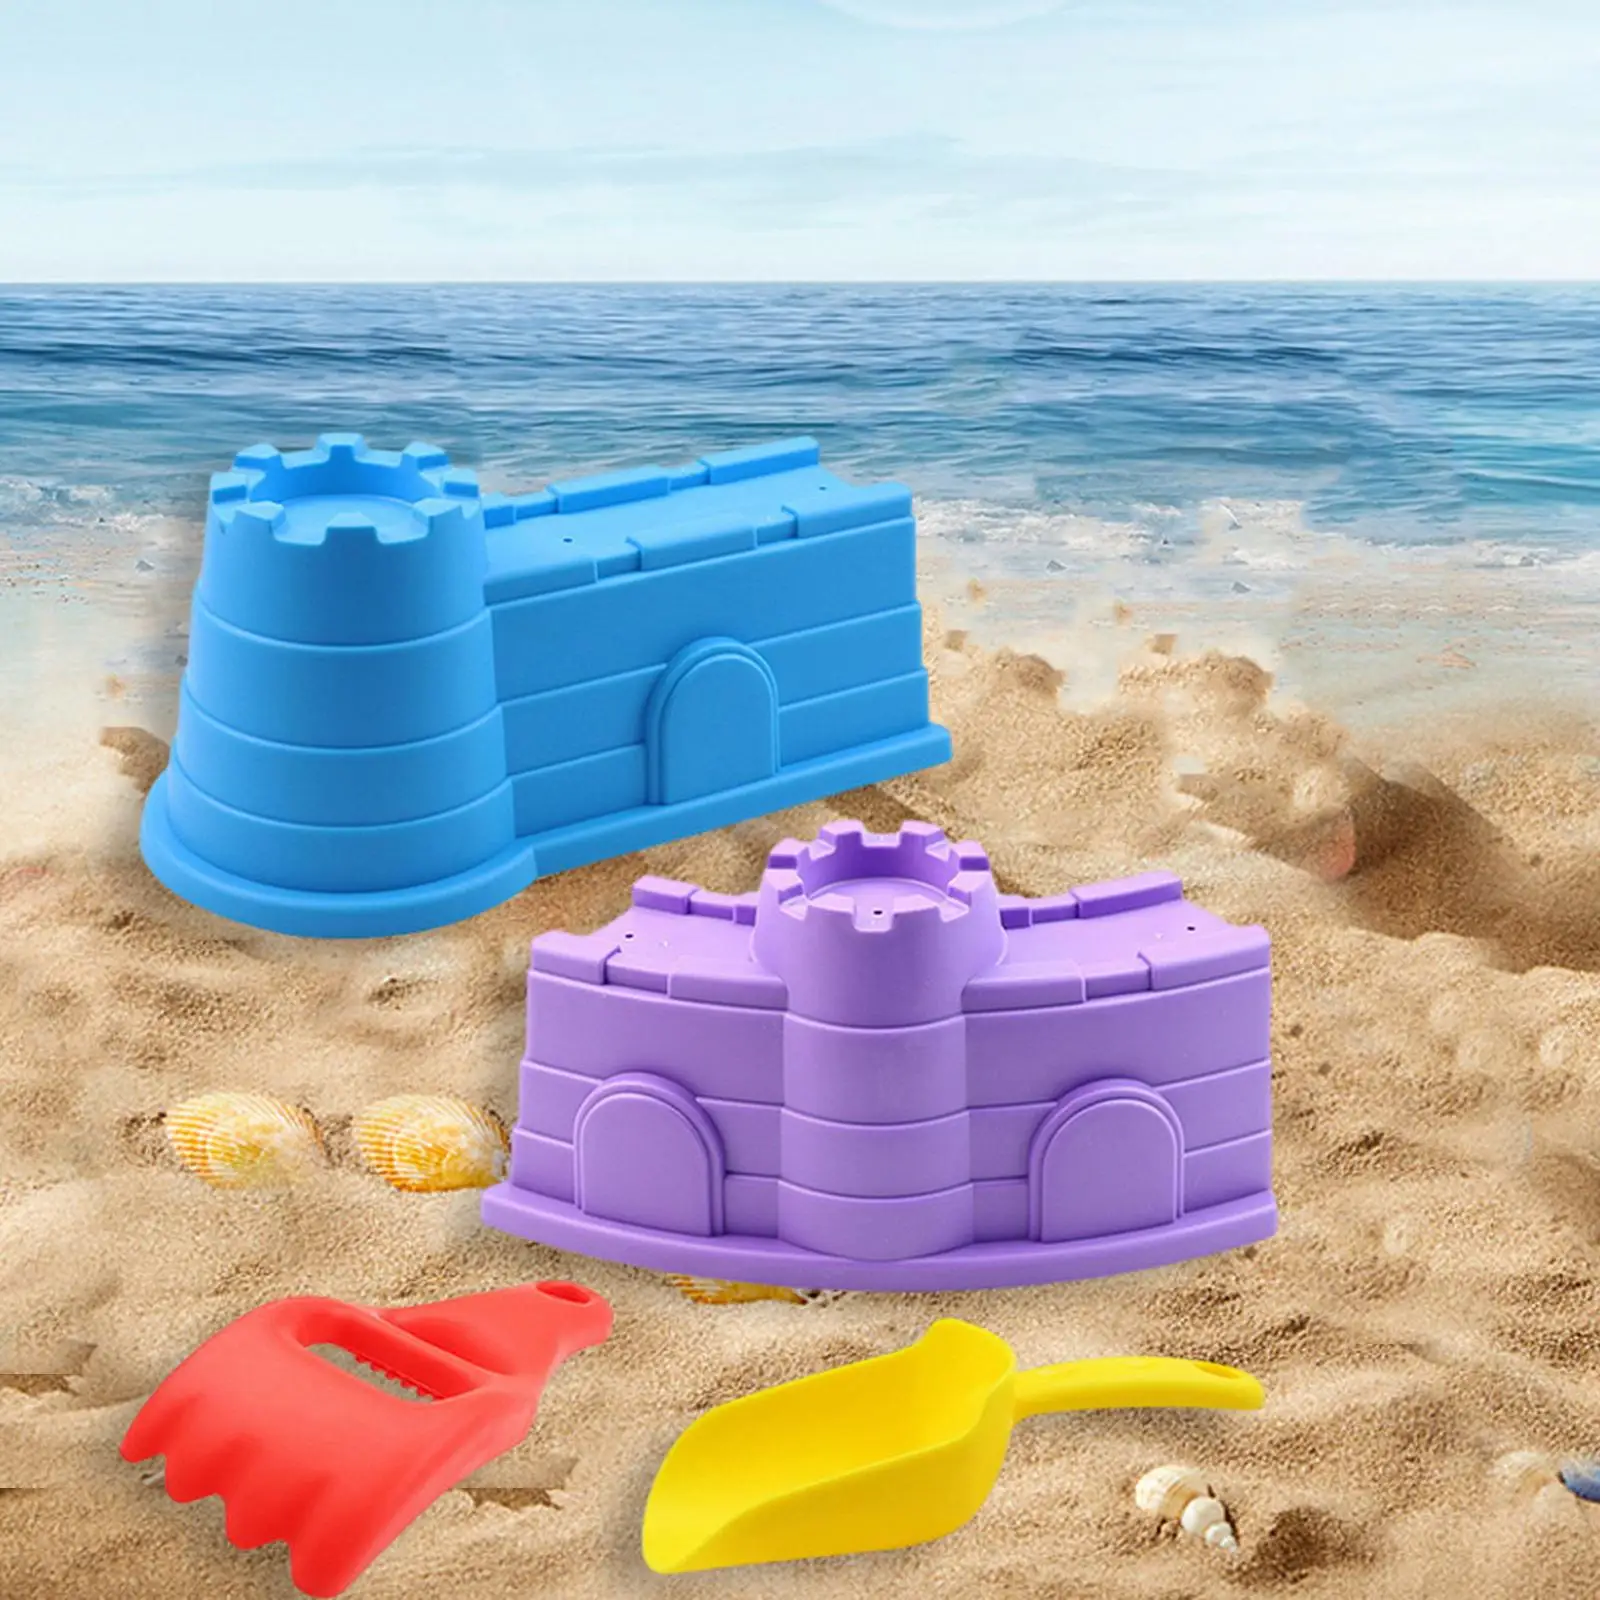 Sand or Beach Castle Making Set for Kids Beach Accessory Interactive Toy Sand Castle Models for Children Boys Girls Outdoor